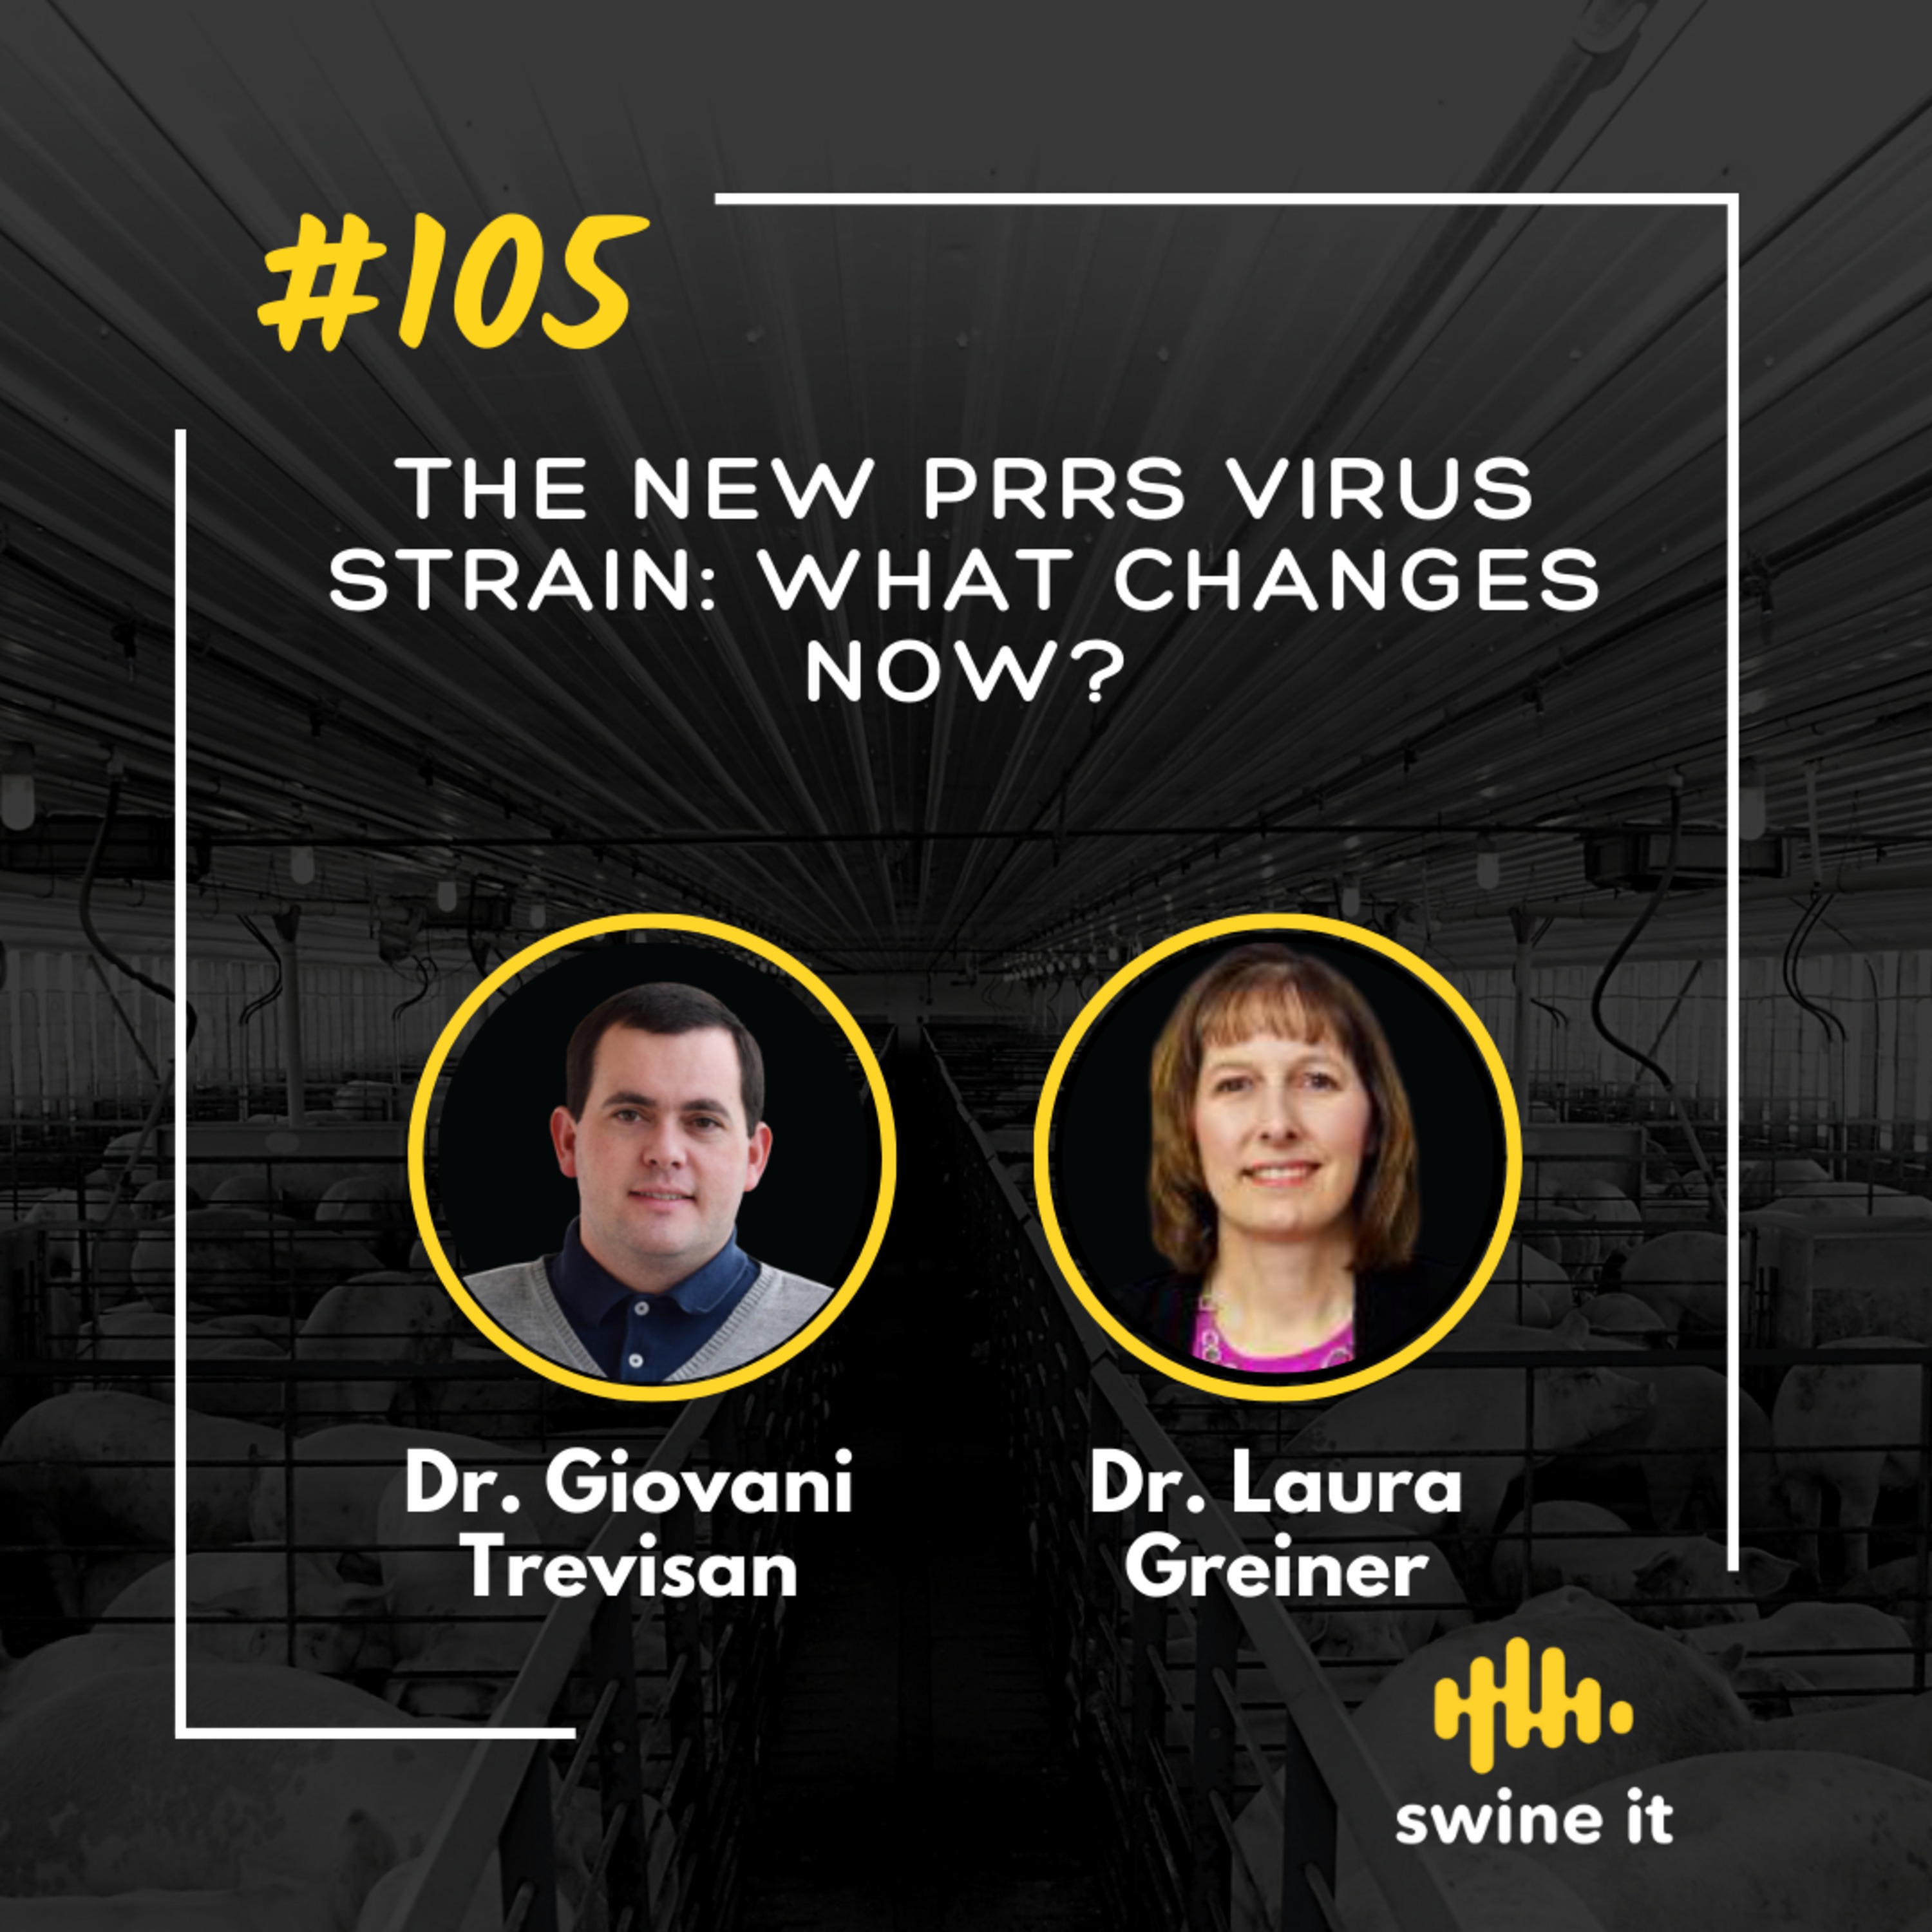 Dr. Giovani Trevisan: New PRRS Virus Insights | Ep. 105